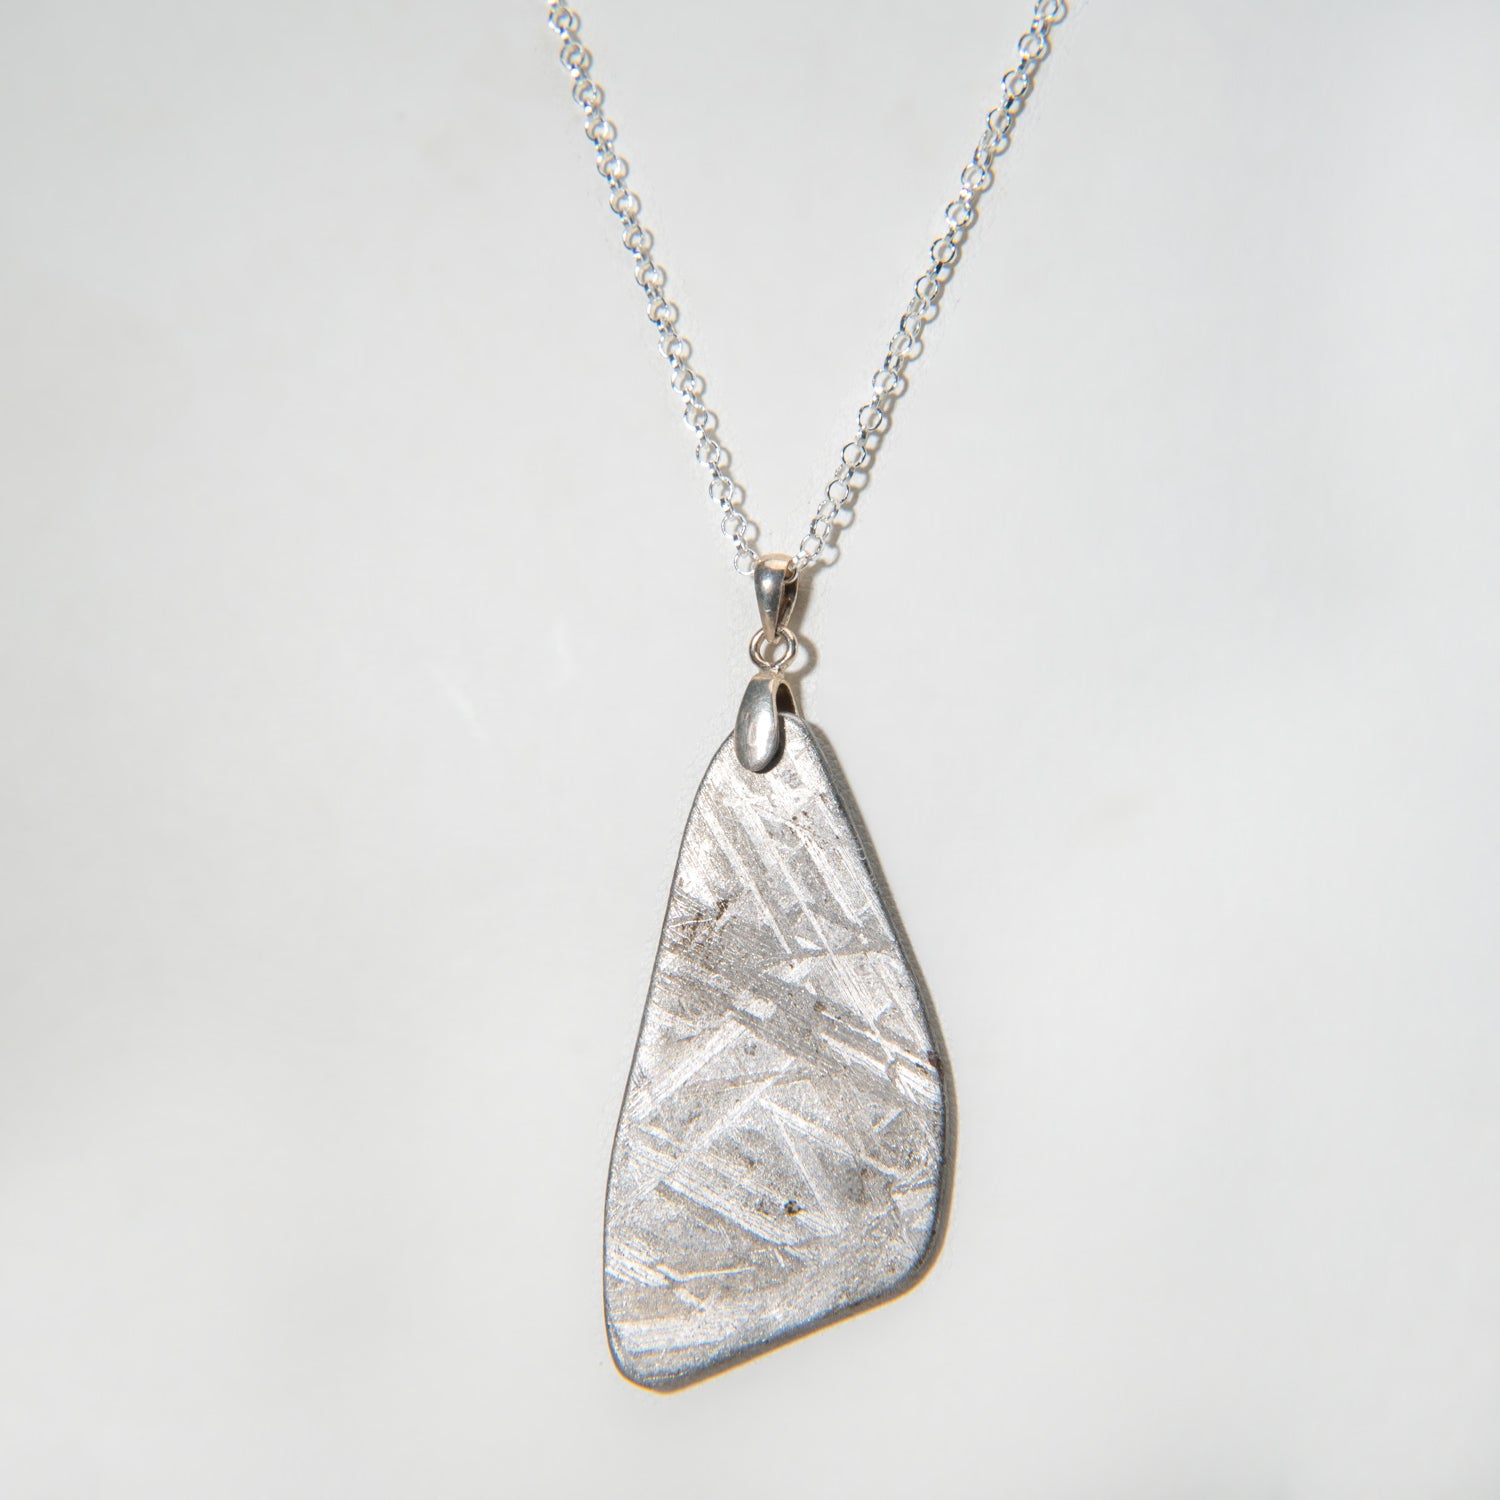 Polished Seymchan Meteorite pendant (8.8 grams) with 18" Sterling Silver Chain